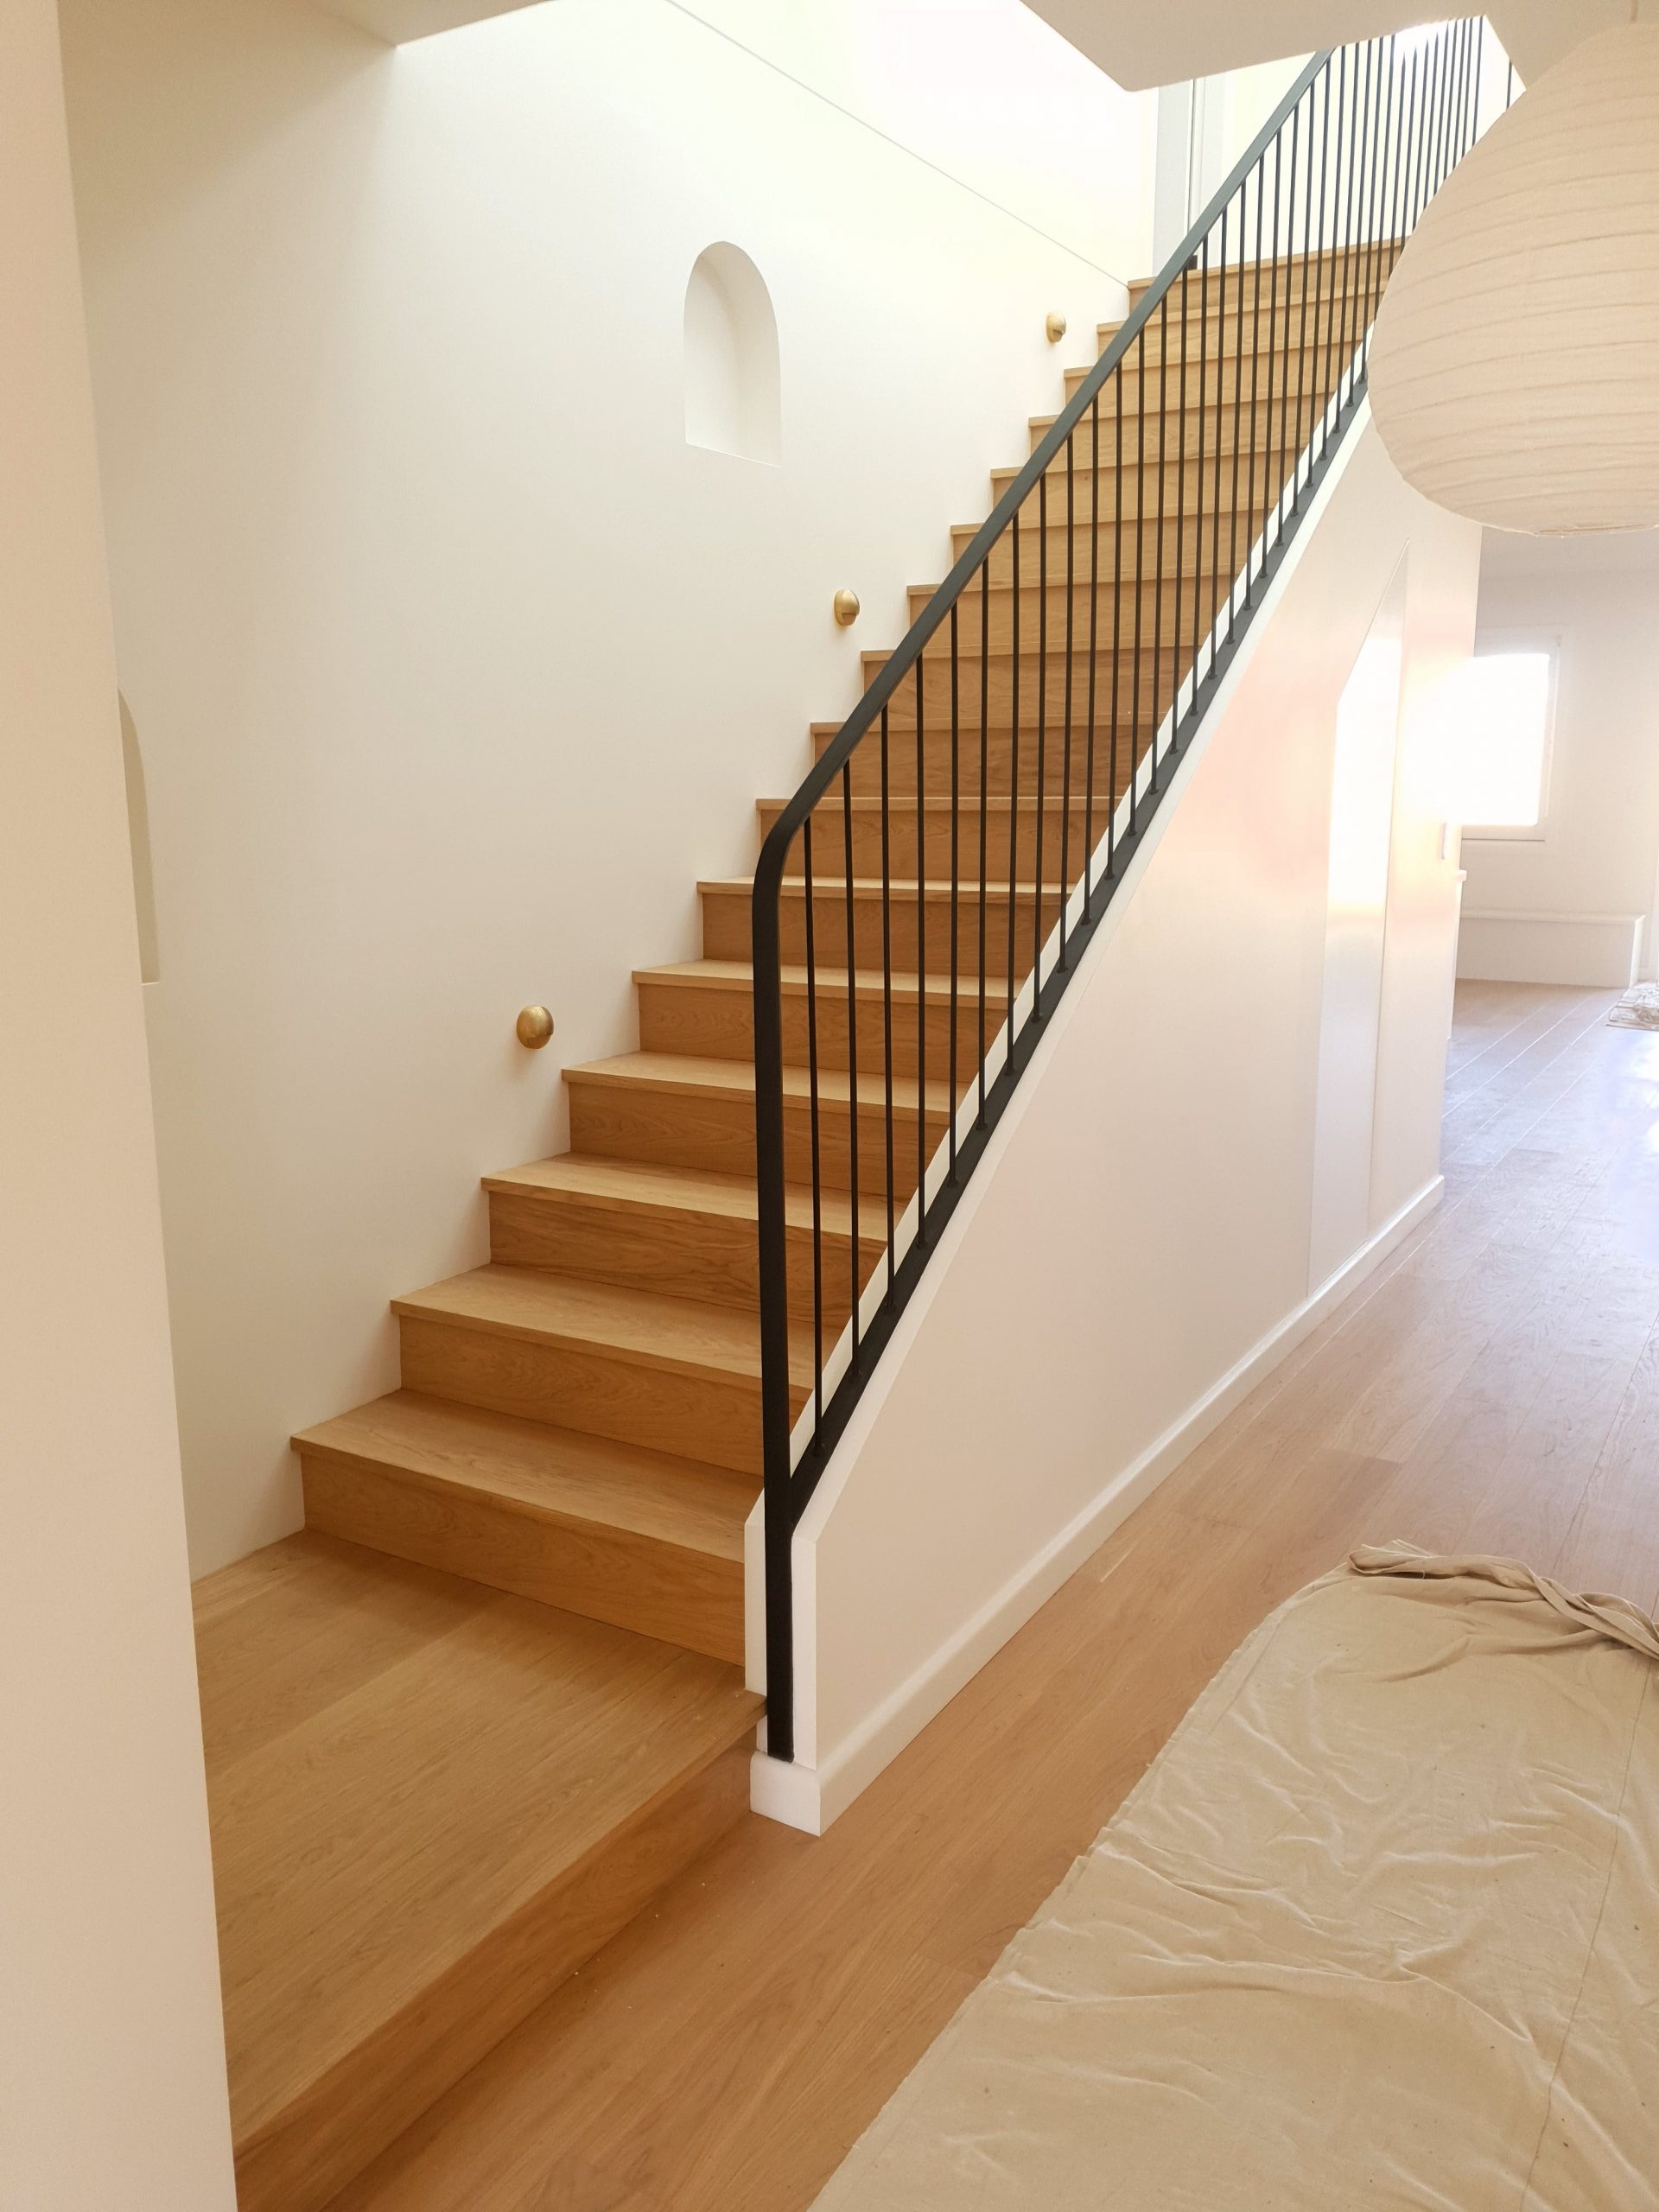 Traditional Timber Staircase - Closed Riser Staircase - The Stair Factory